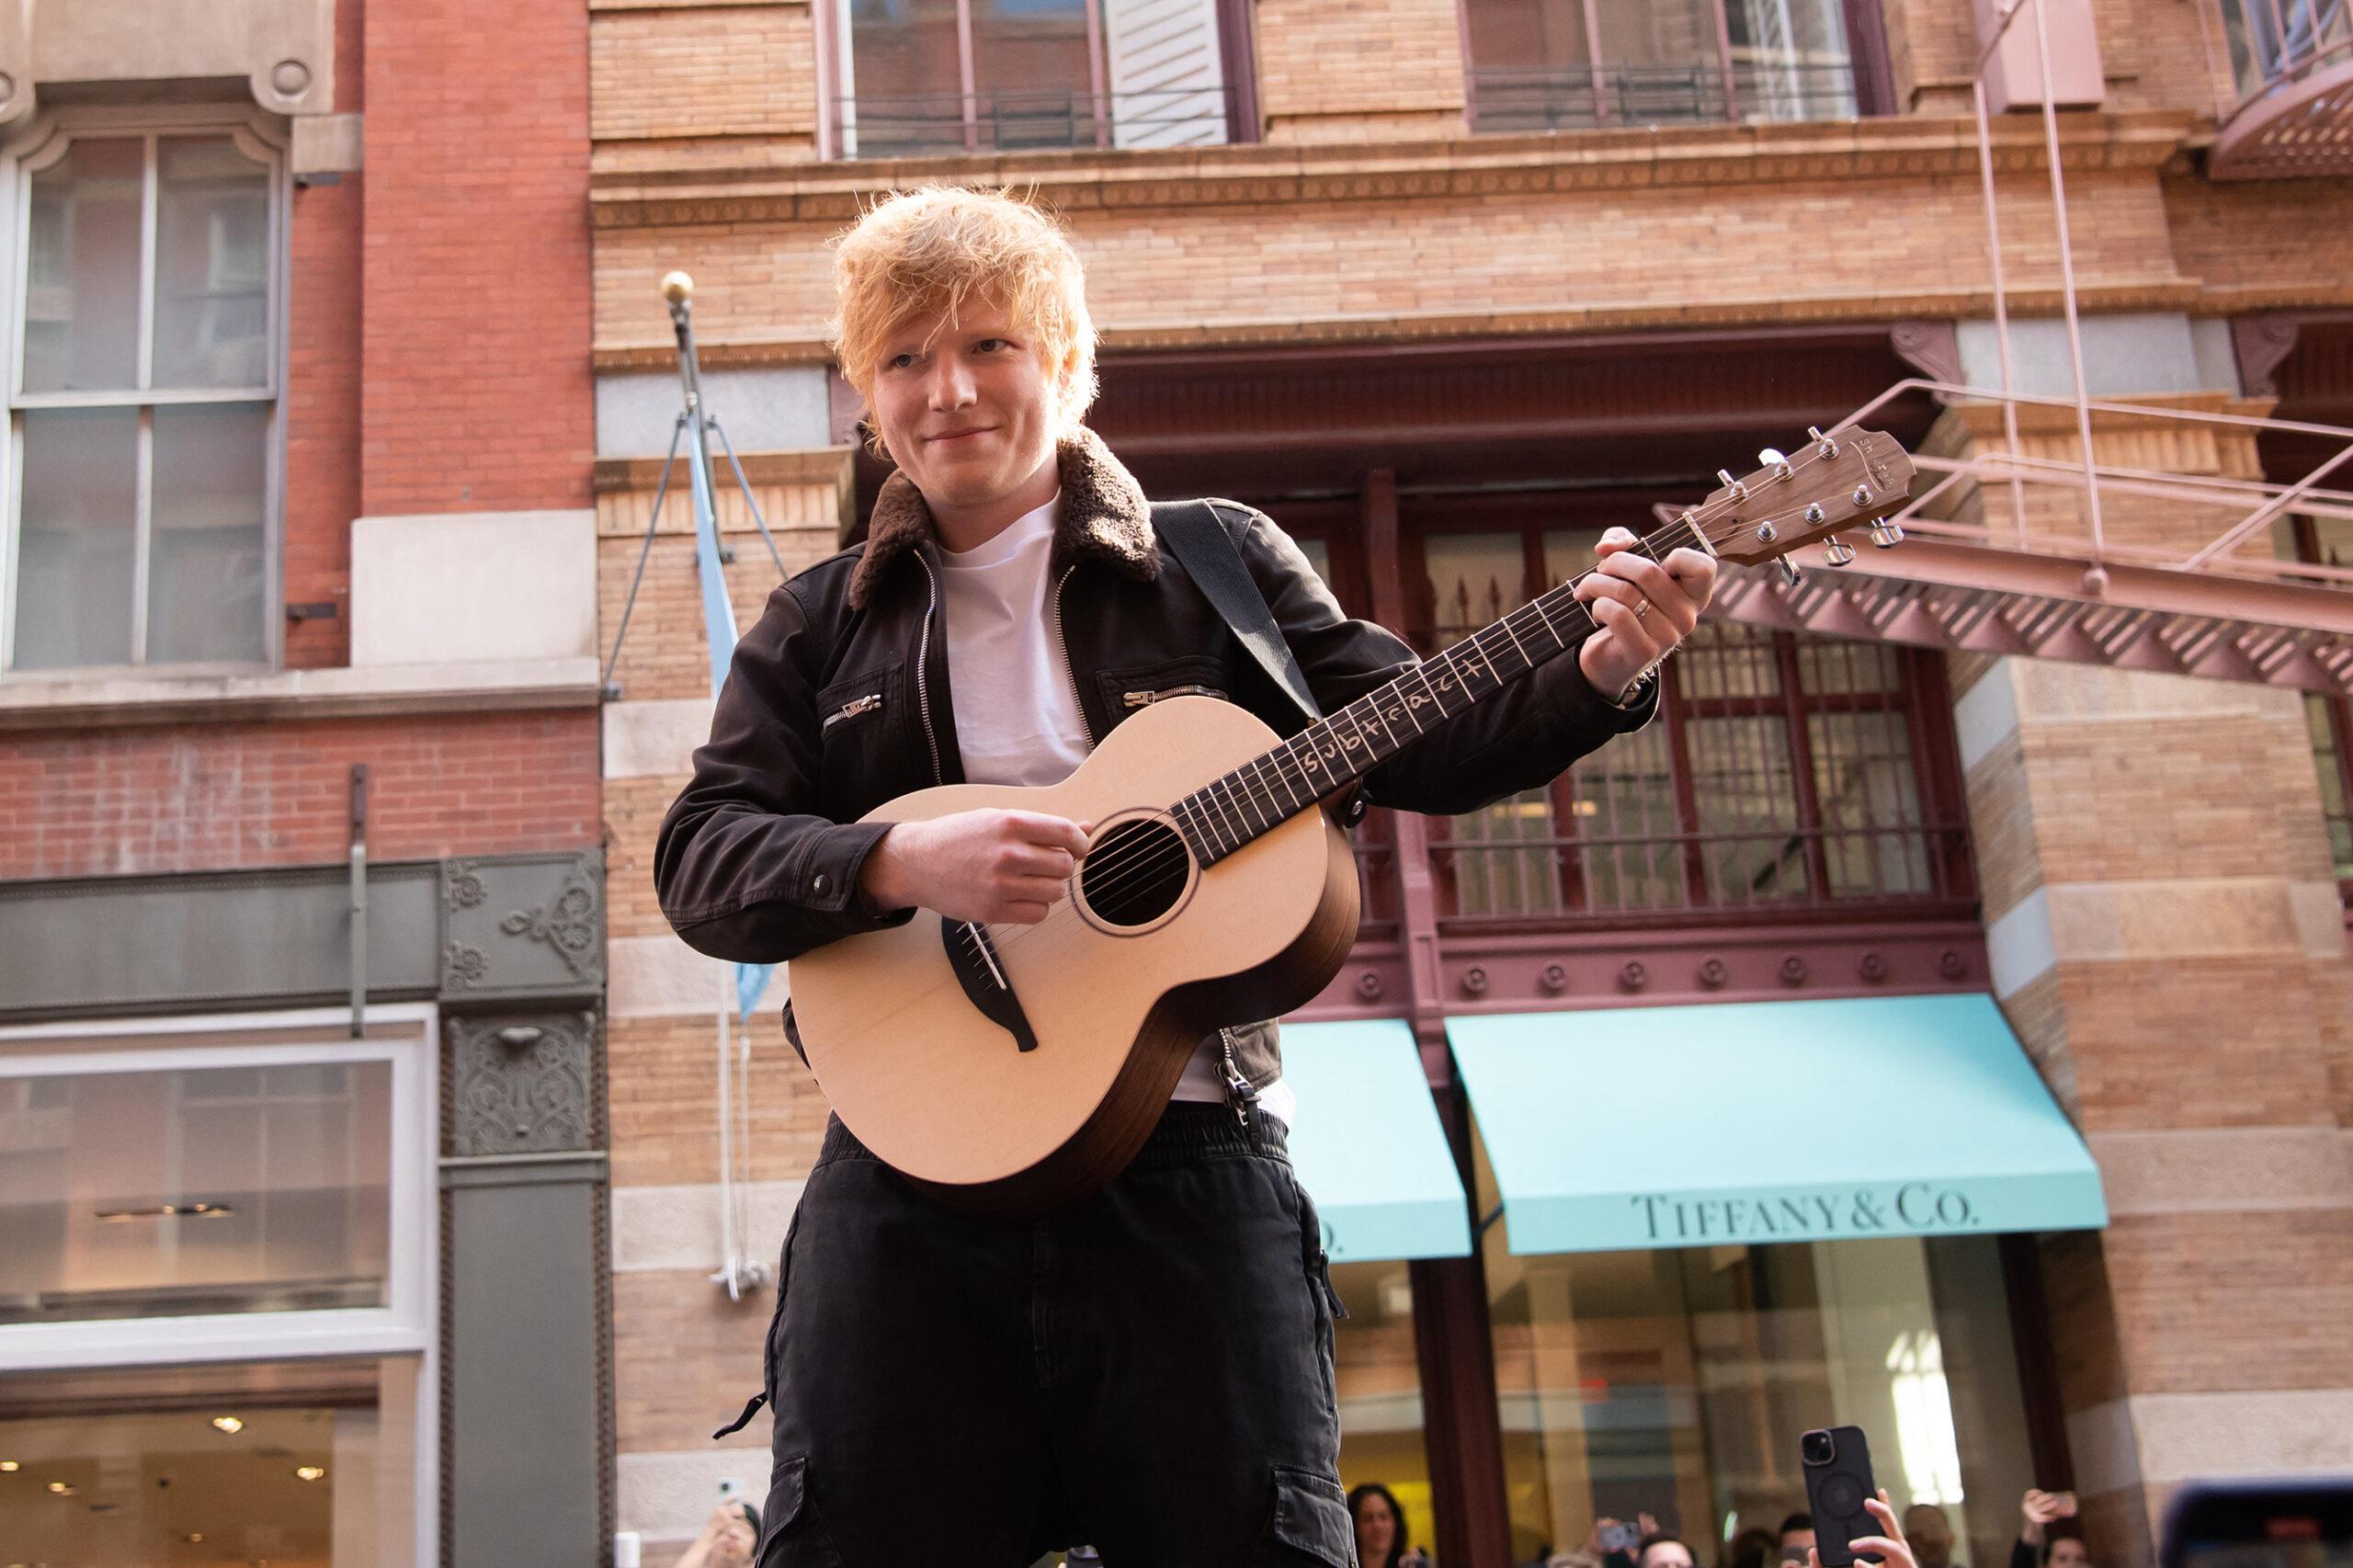 Ed Sheeran Performs Outside Pop Up Store in NYC